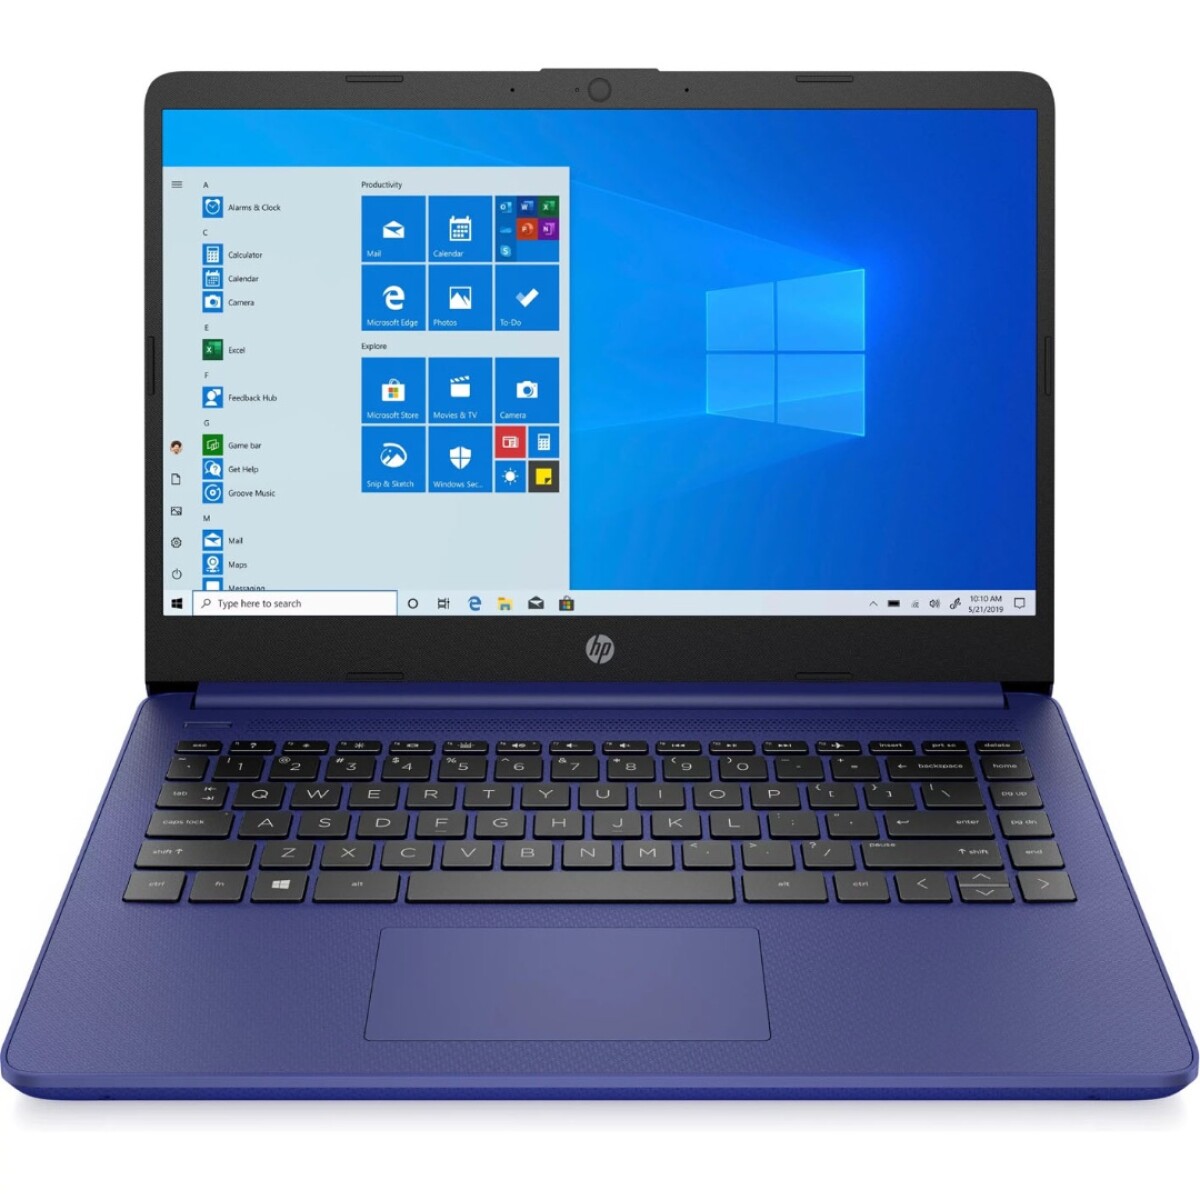 Notebook HP Dualcore 2.6GHZ, 4GB, 64GB Ssd, 14" Touch - 001 